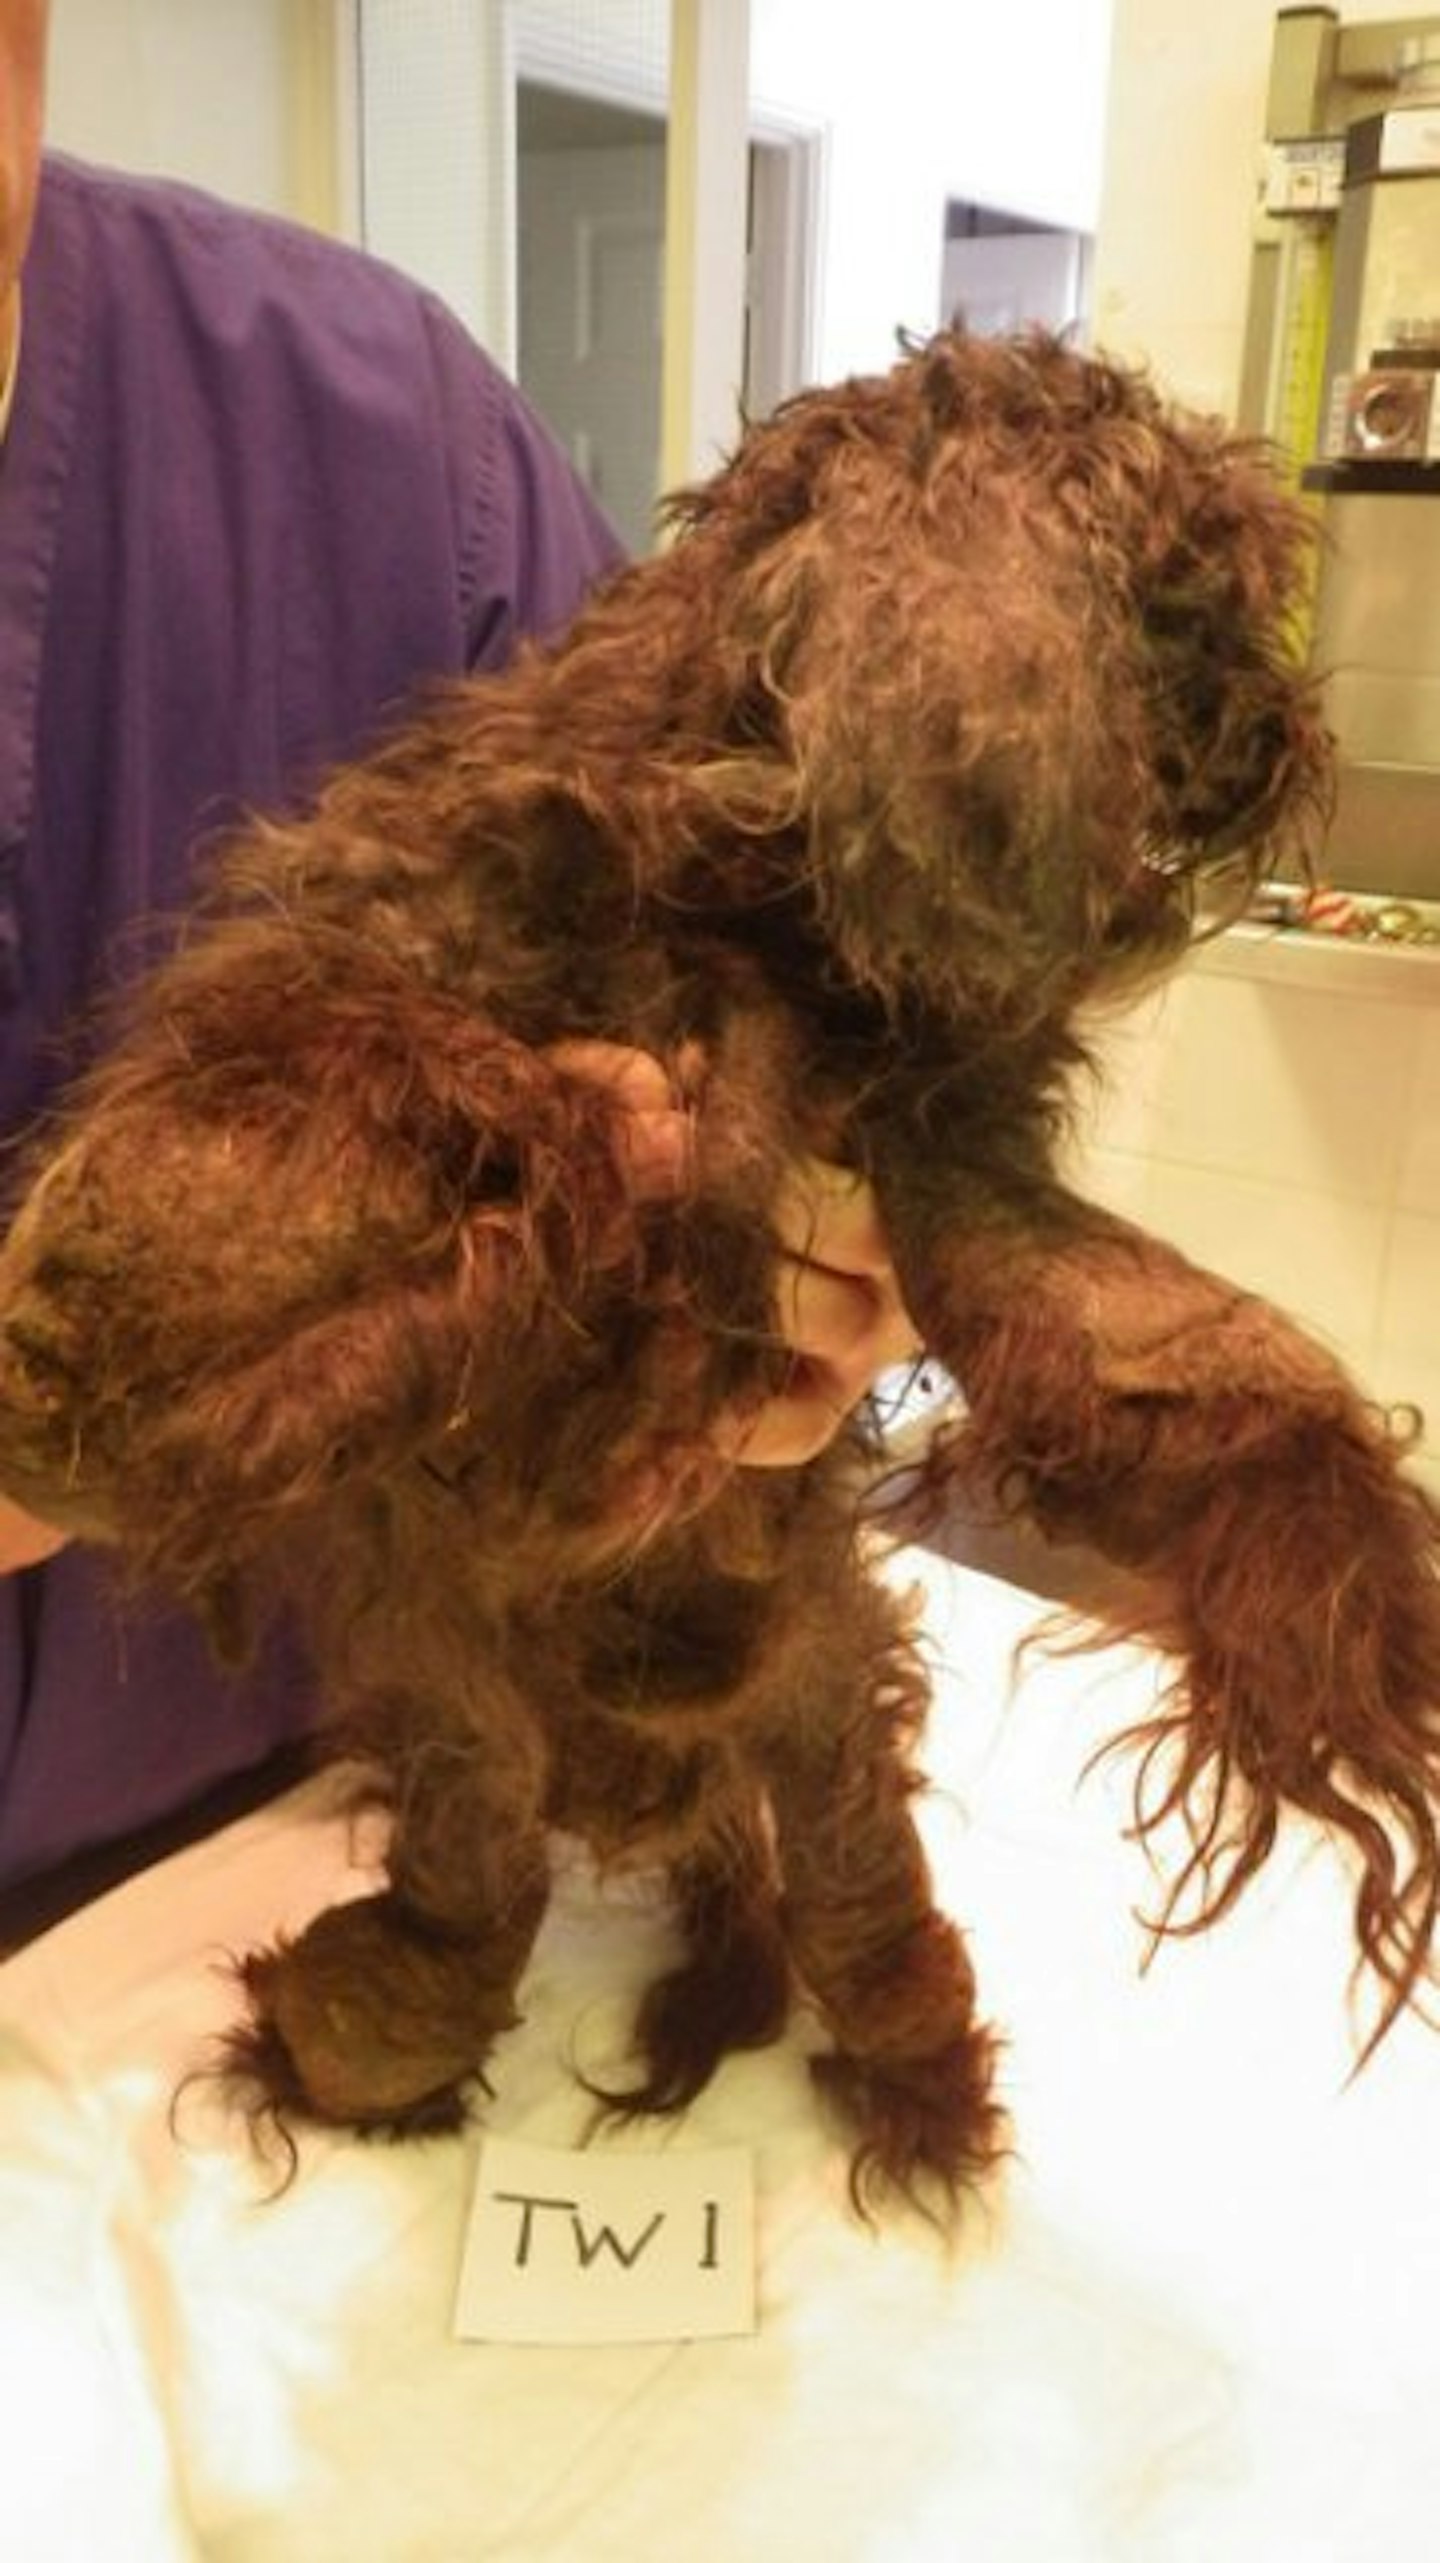 Cheeky was covered in matted fur when he was taken from his owner